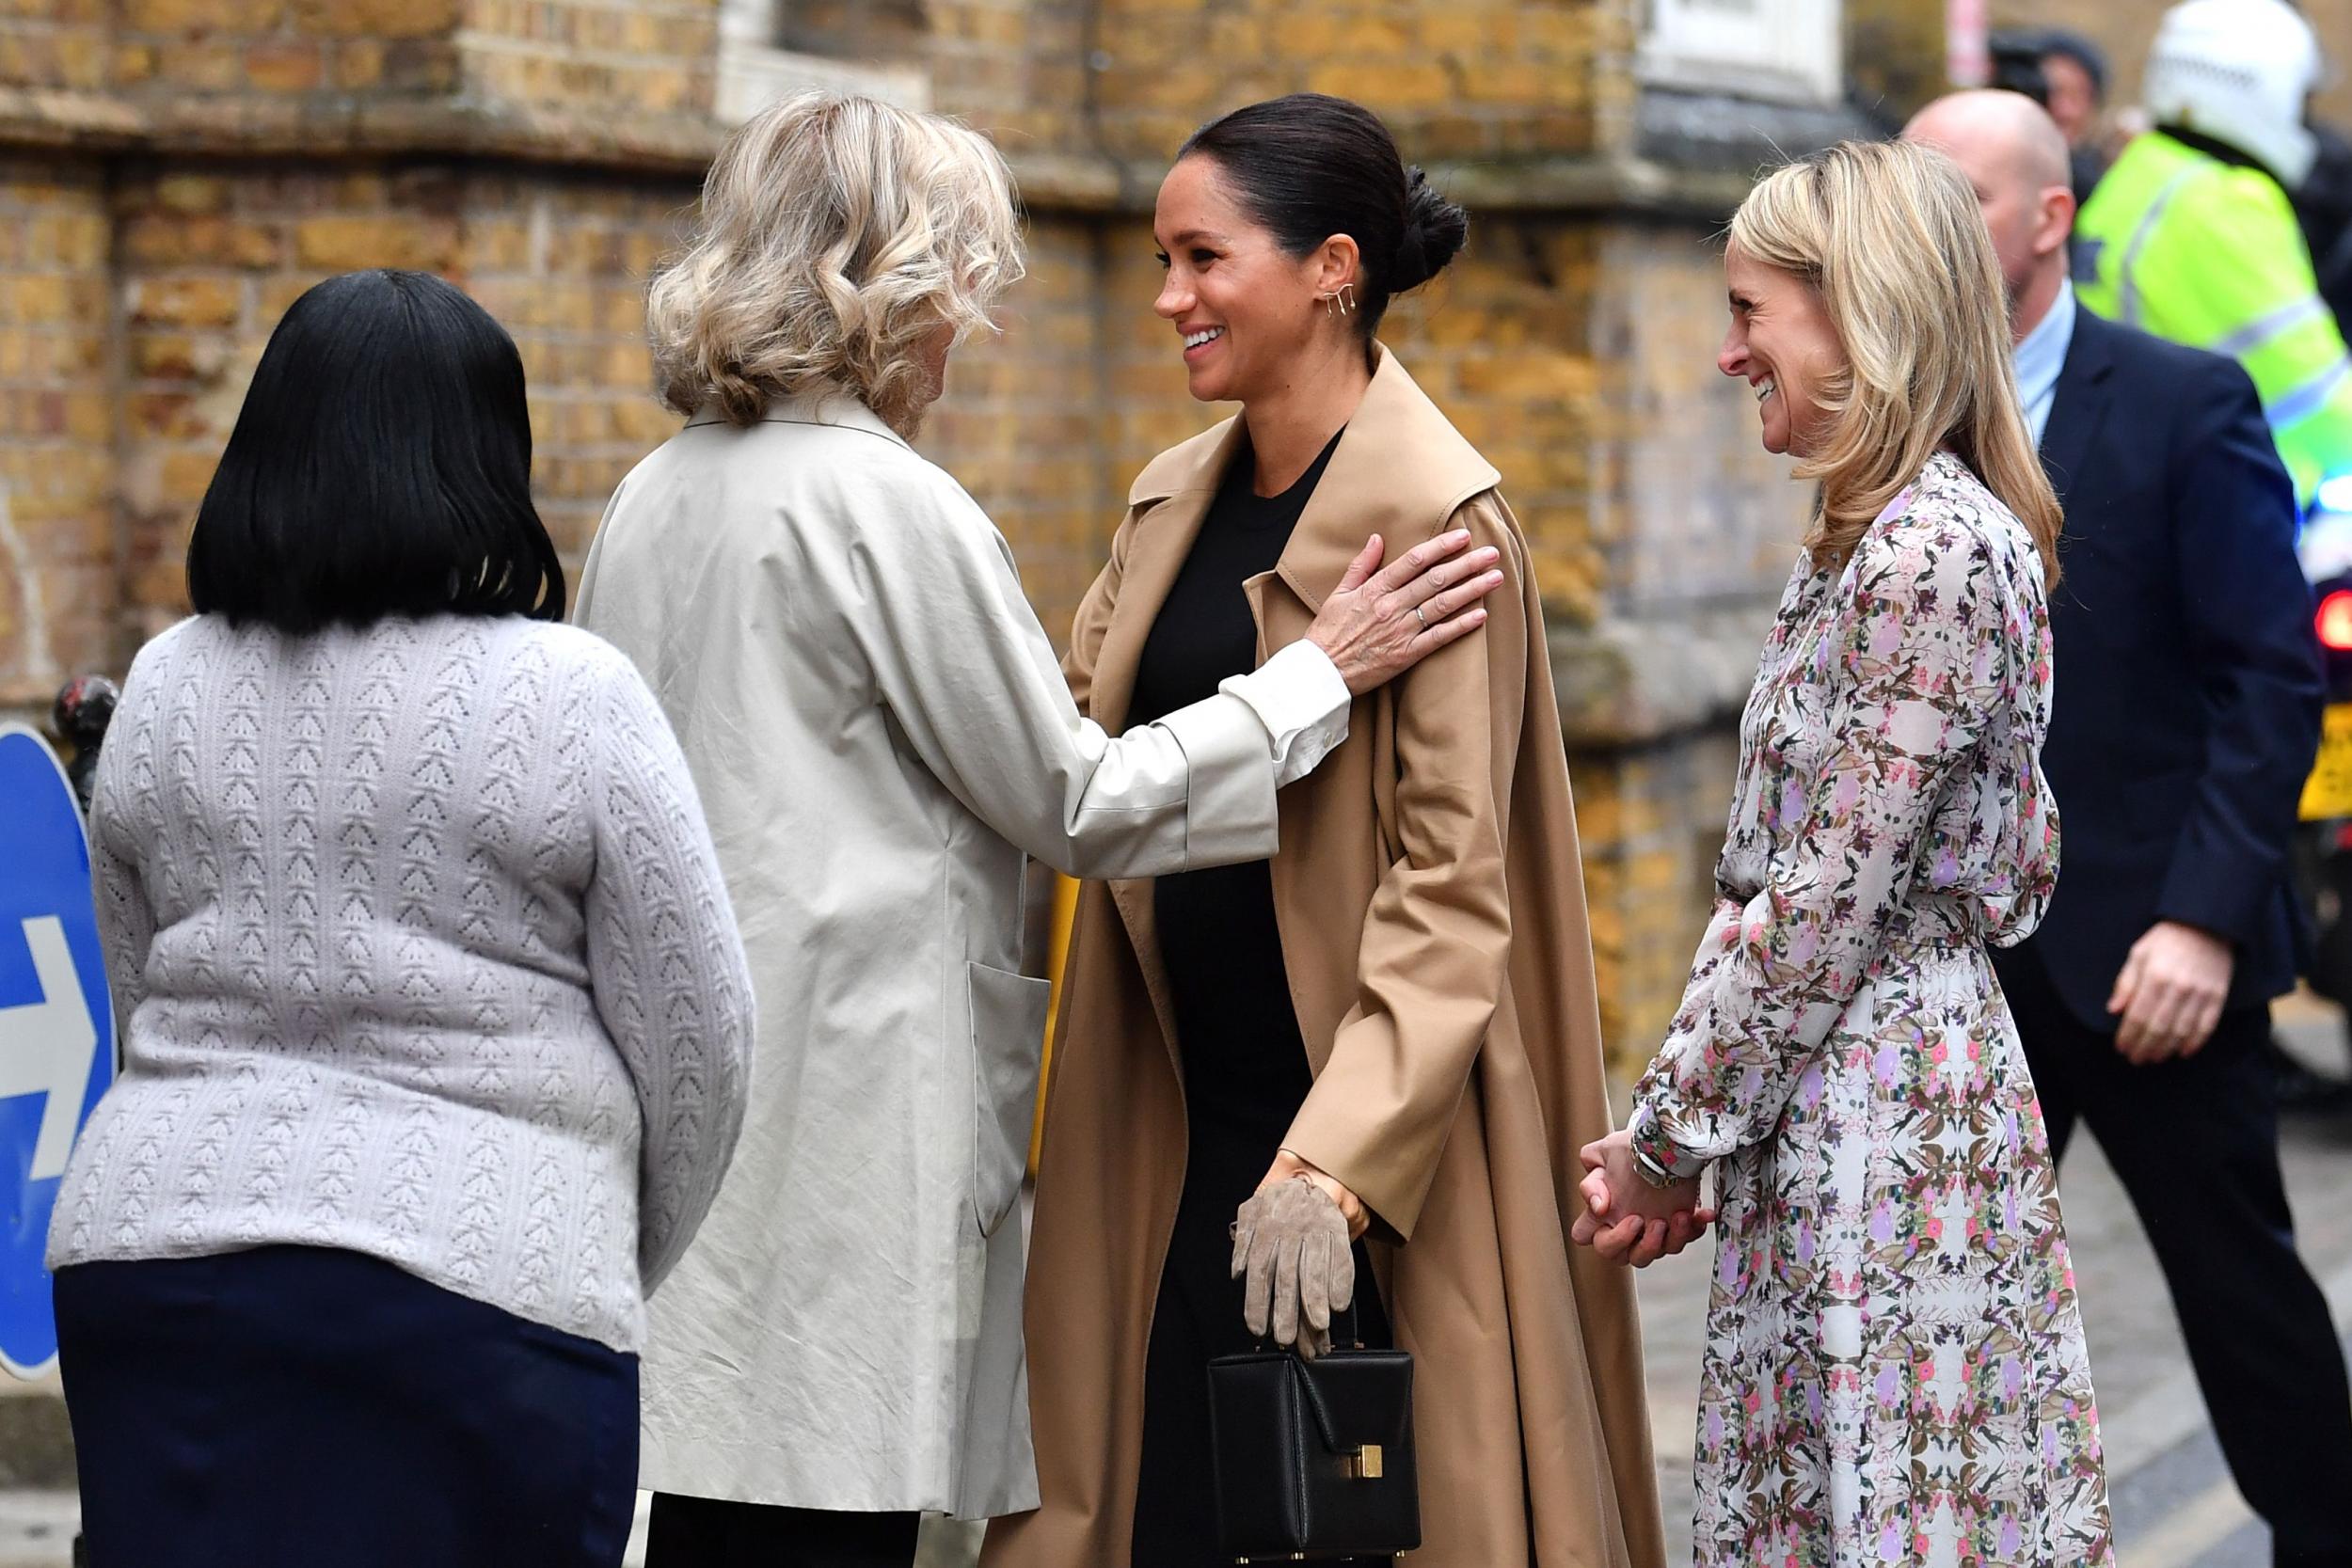 The Duchess of Sussex is greeted as she arrives at St Charles hospital in west London to visit Smart Works on 10 January